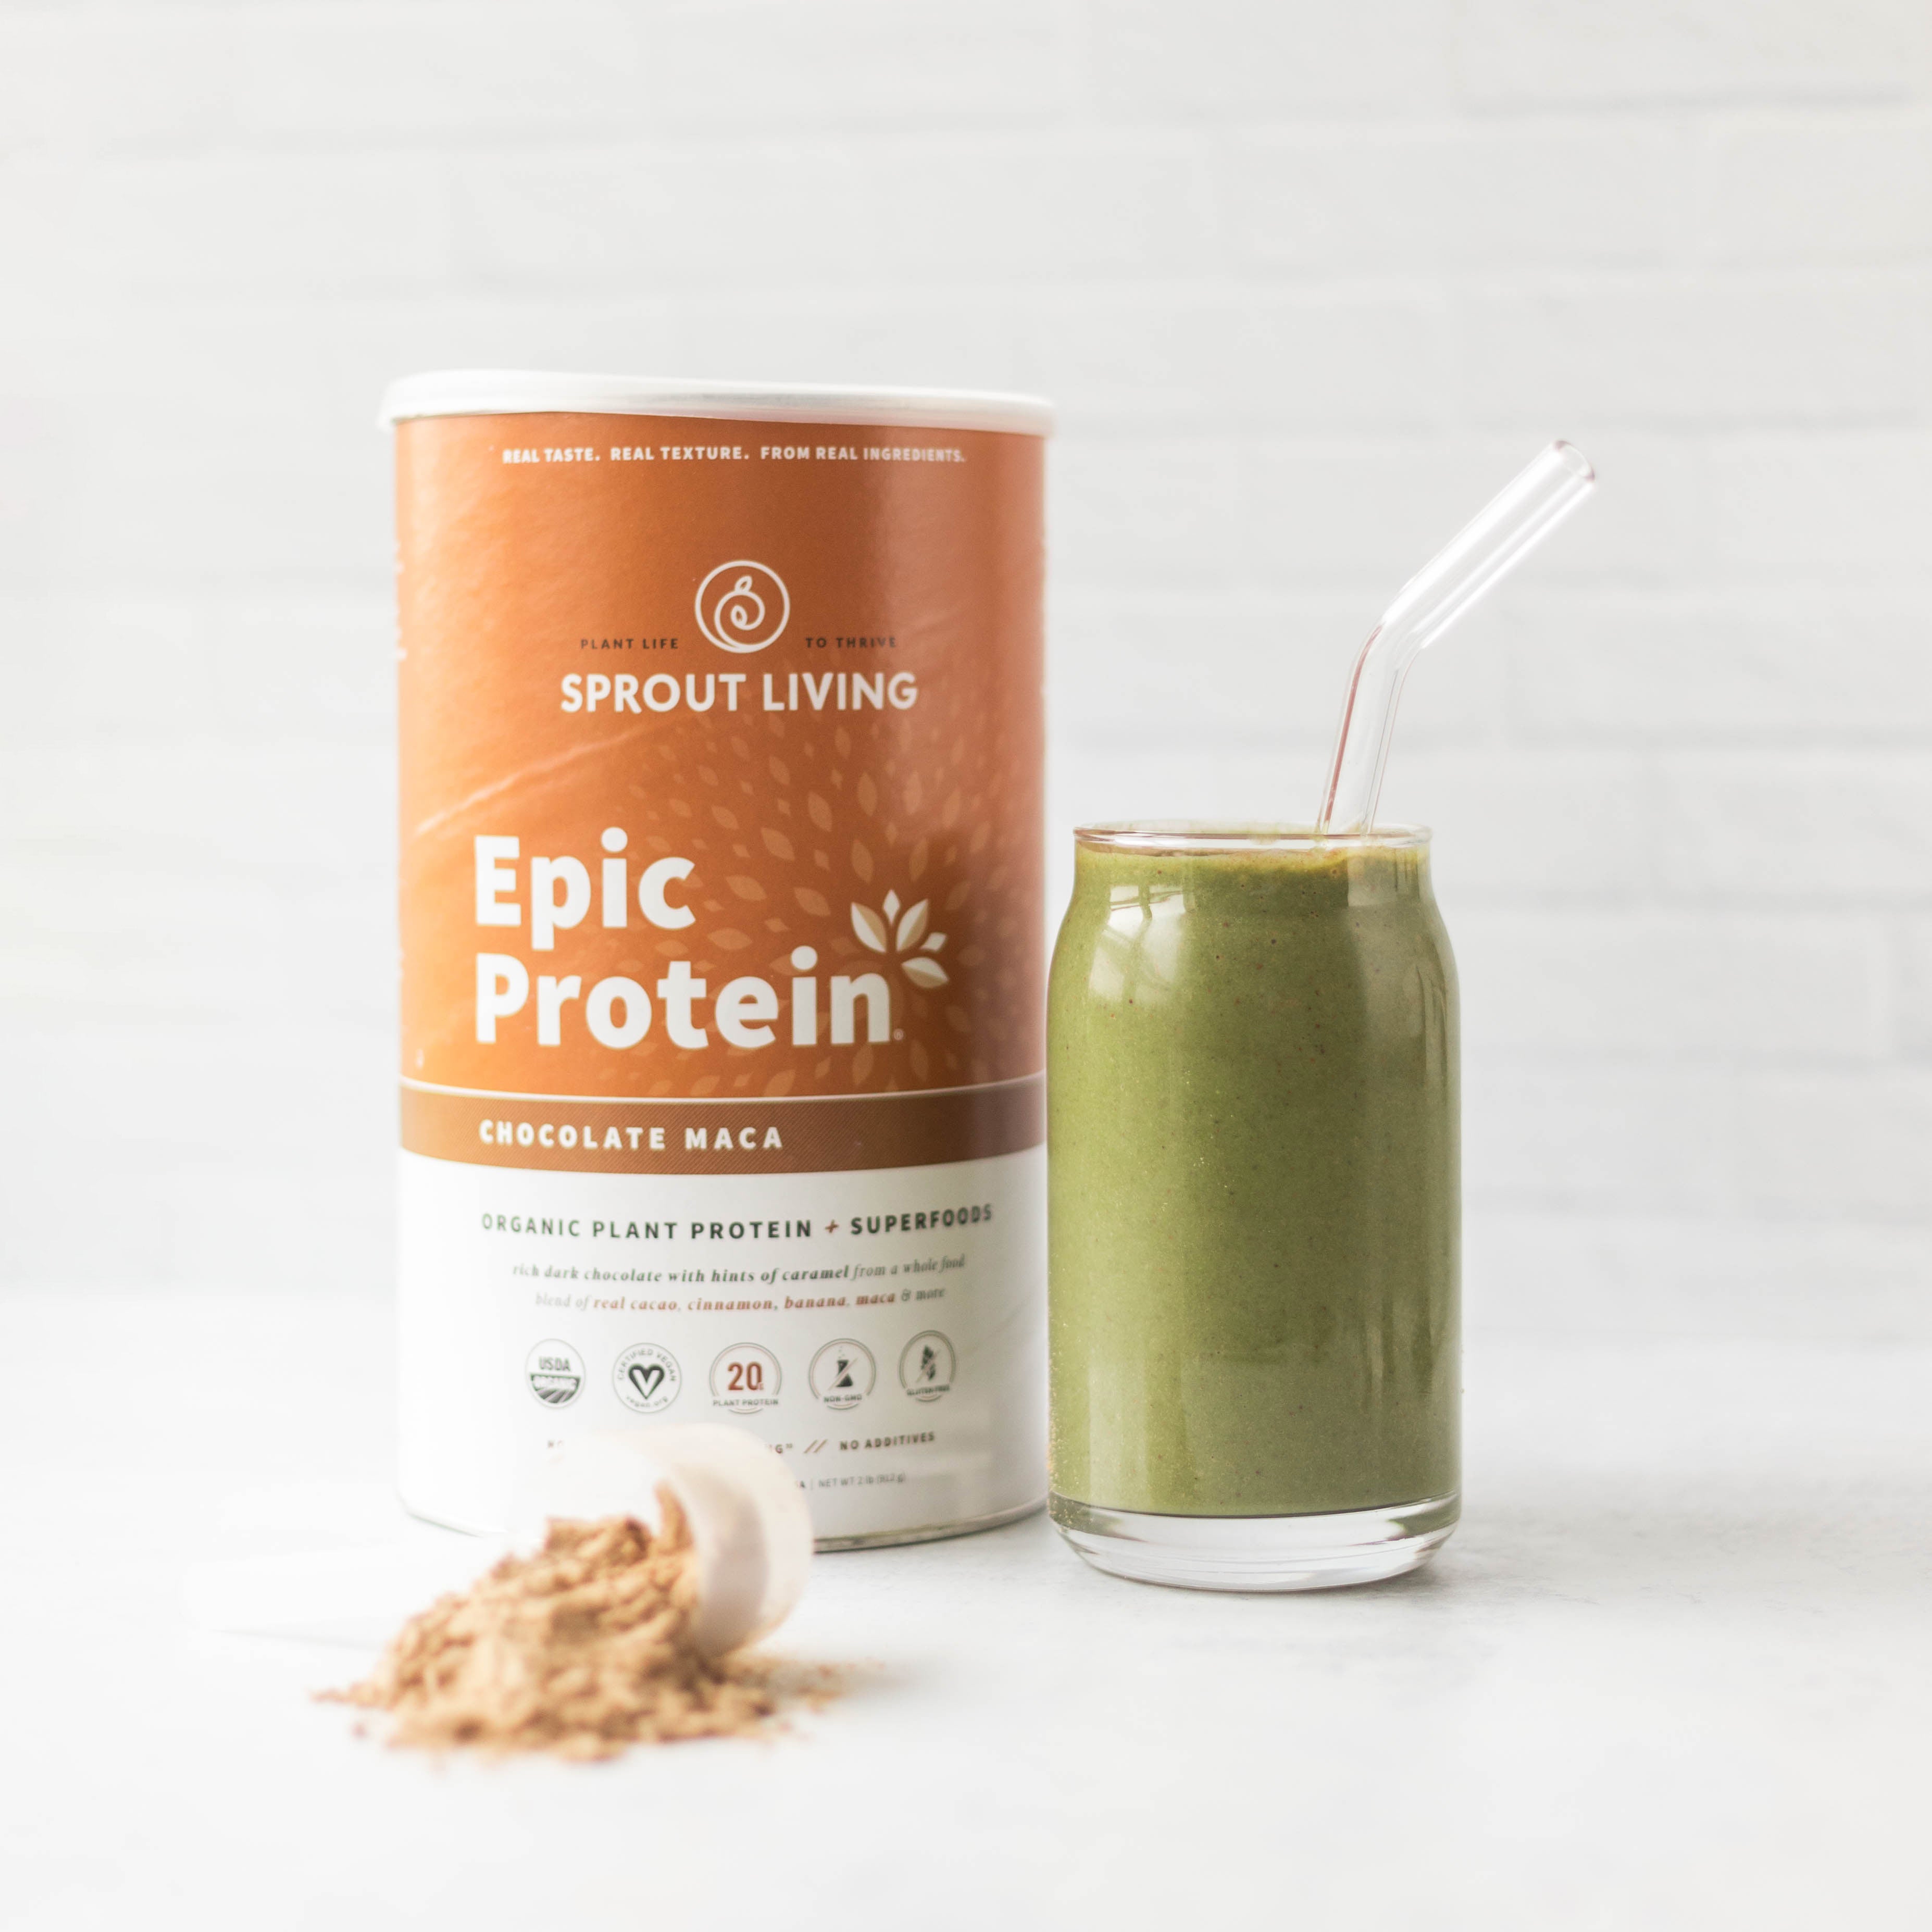 Epic Protein Chocolate Maca with green smoothie